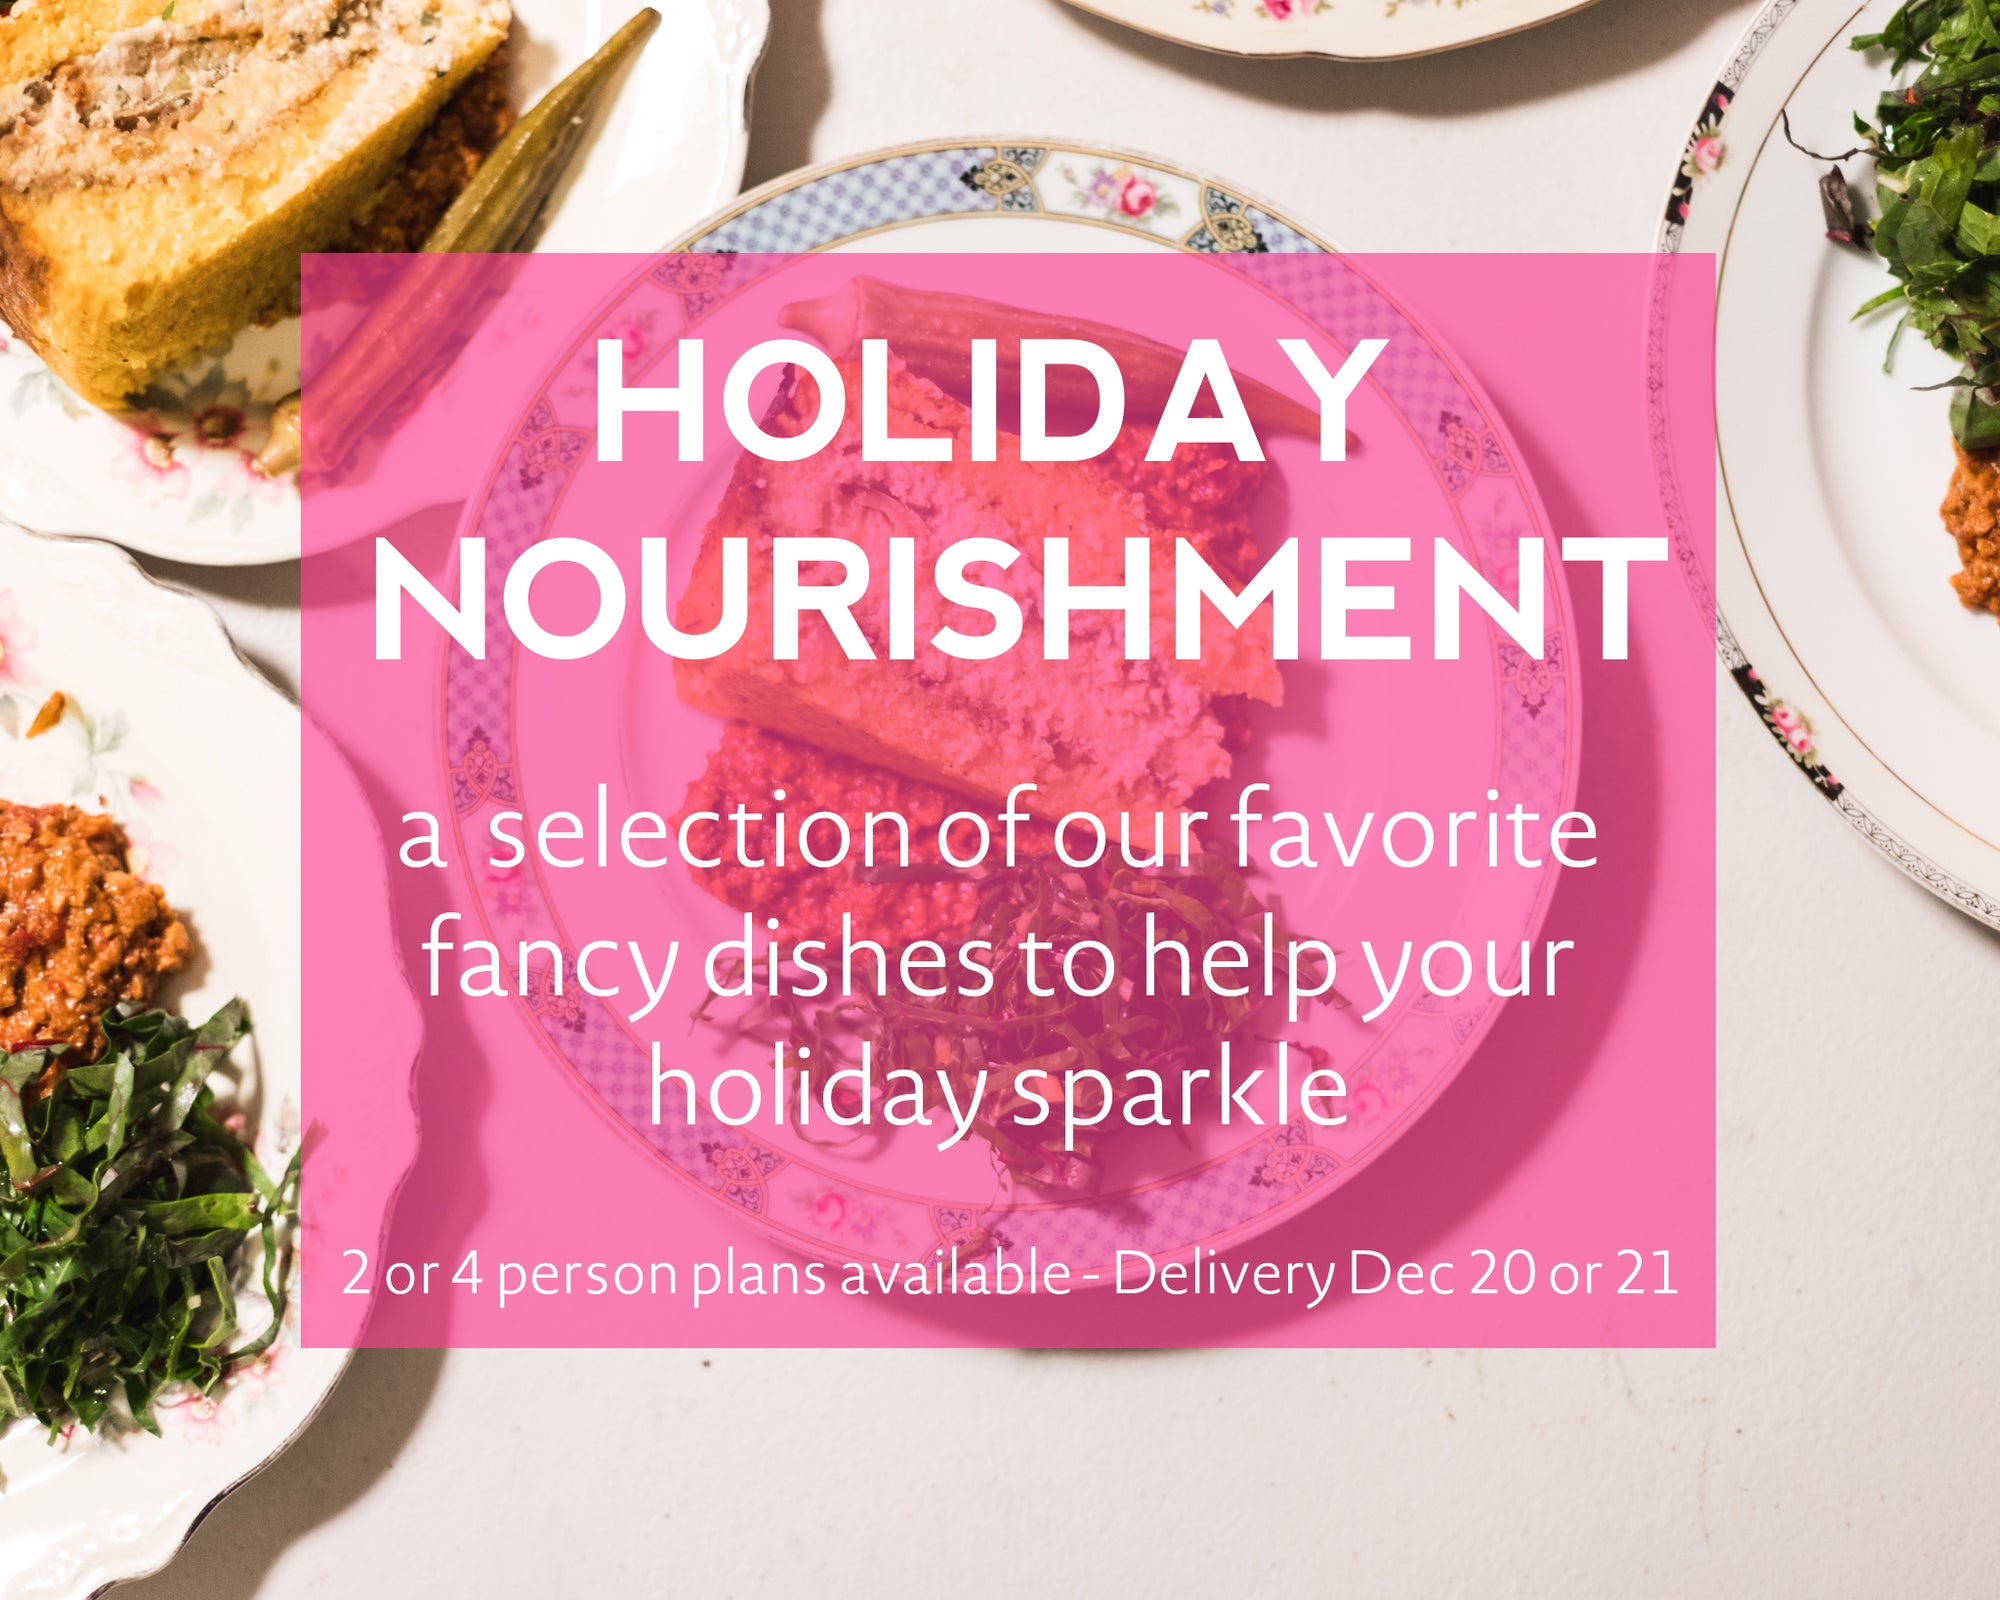 This year's Holiday Nourishment packages are our swankiest yet!